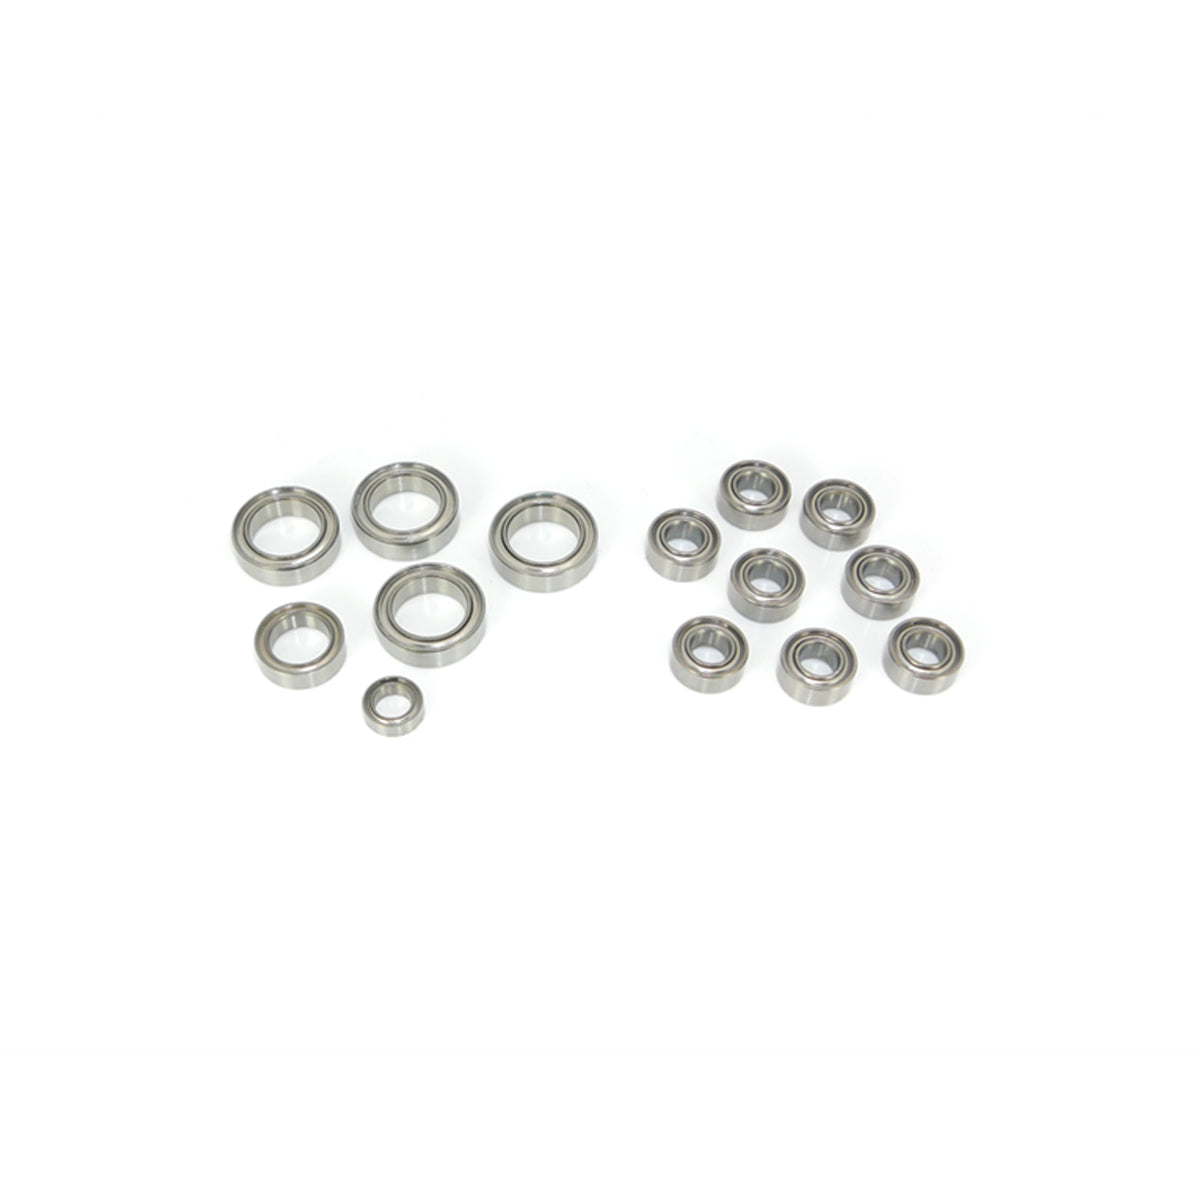 Fast-selling Wholesale abec 7 ceramic bearings 4x10x4 For Any Mechanical  Use 